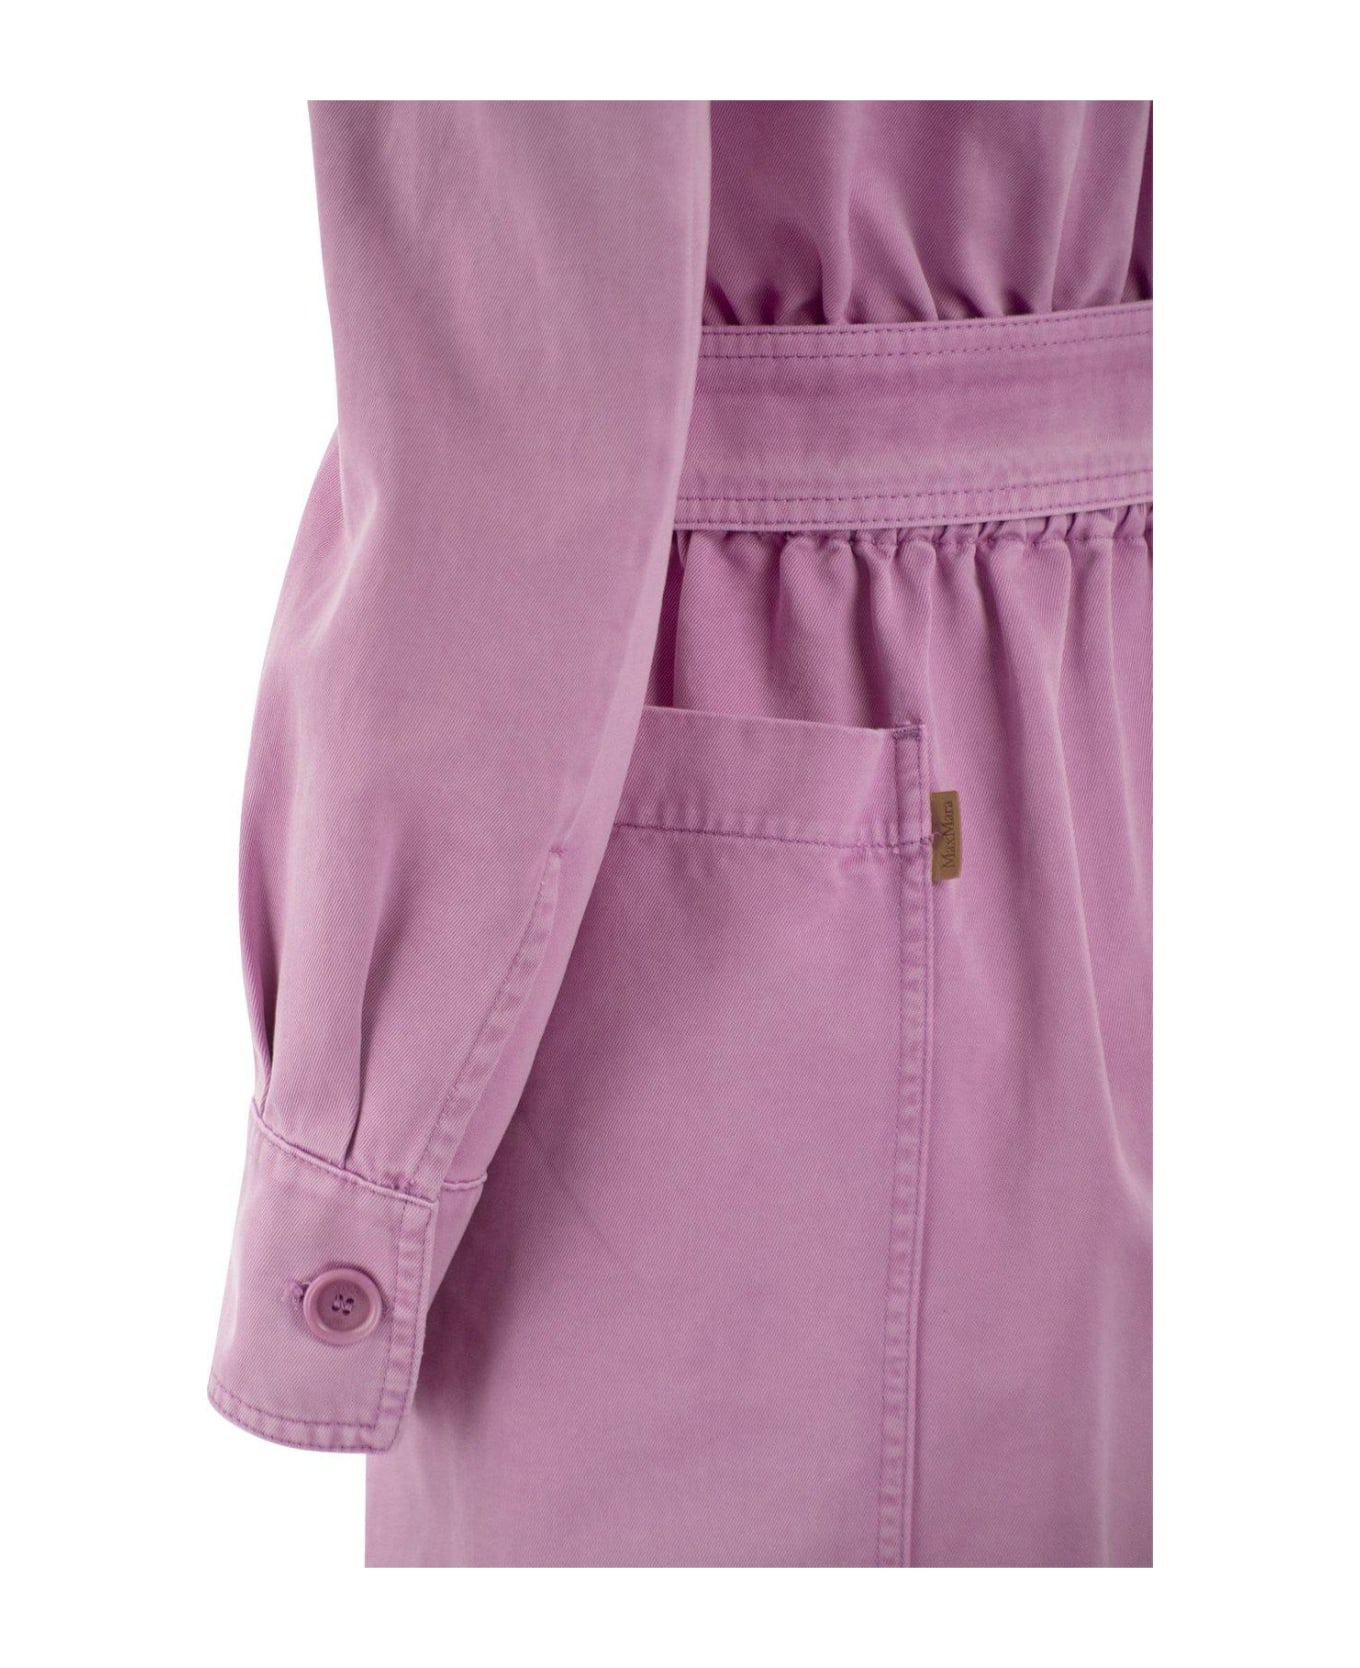 Max Mara Belted Long-sleeved Jumpsuit - Lilac